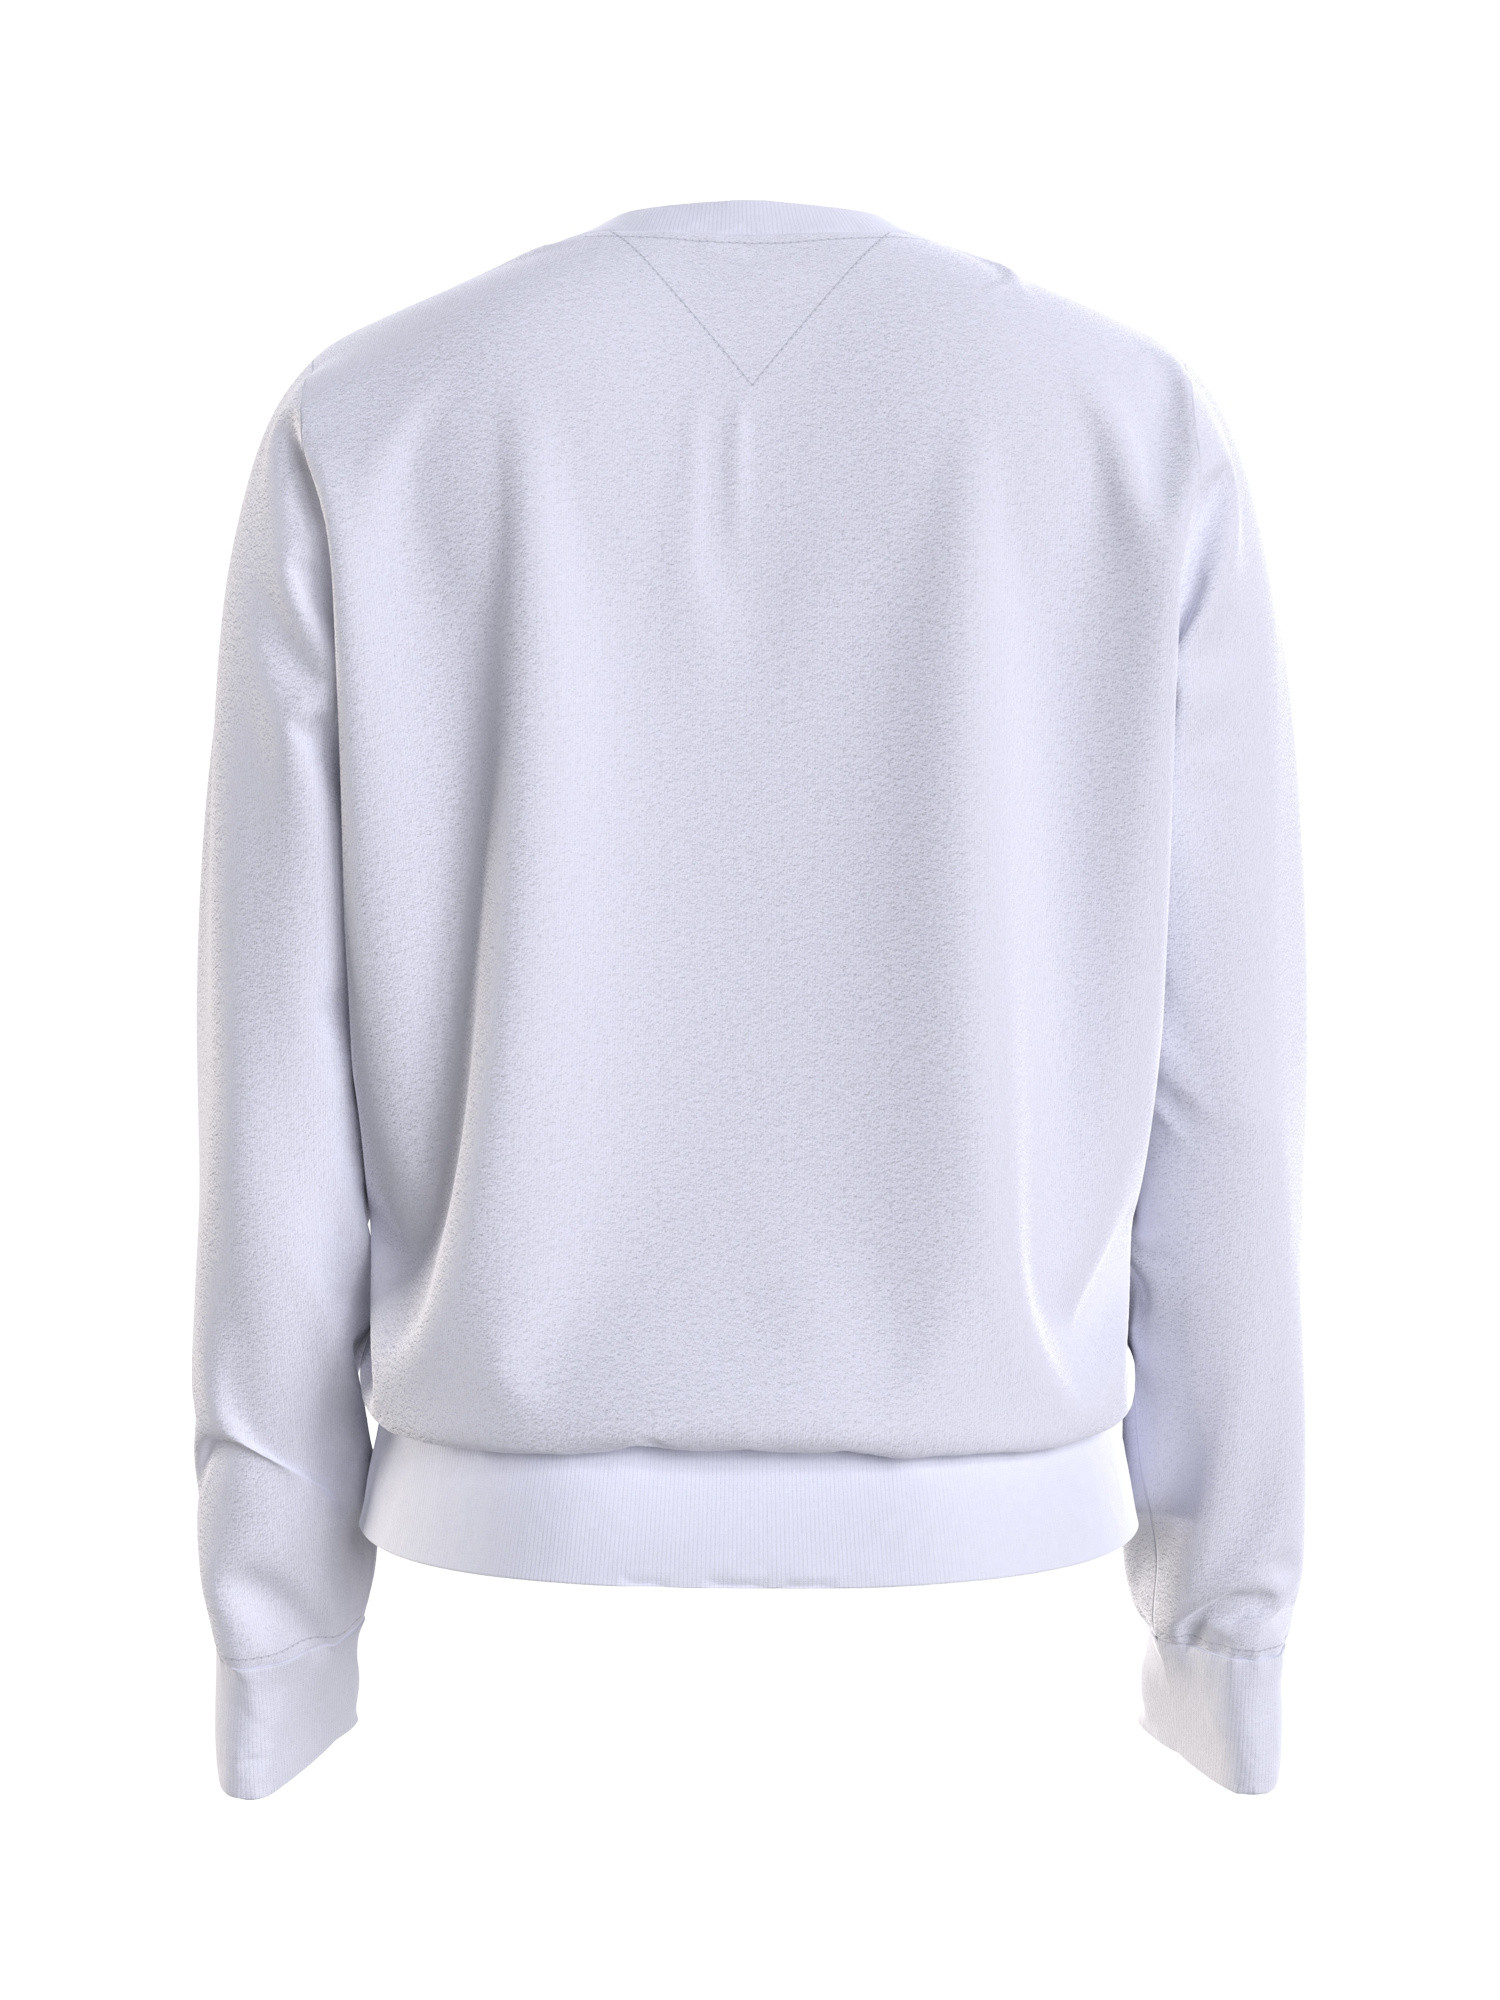 Tommy Jeans - Cotton crewneck sweatshirt with logo, White, large image number 4